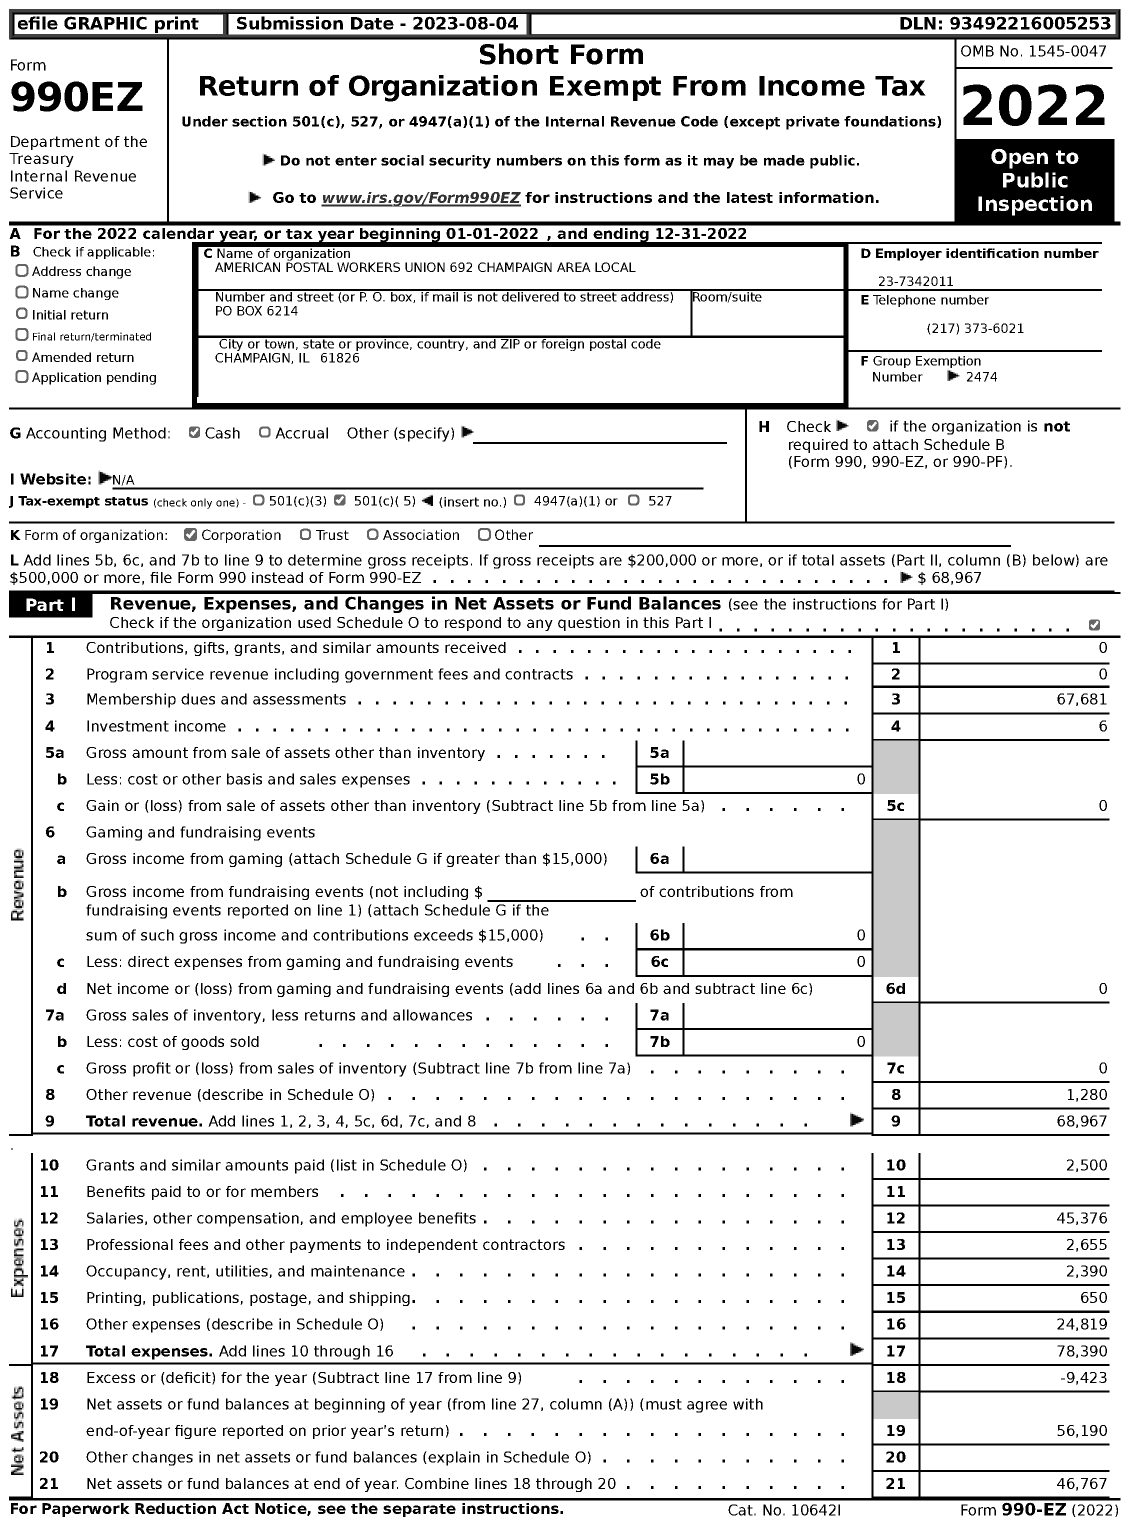 Image of first page of 2022 Form 990EZ for American Postal Workers Union - 692 Champaign Area Local